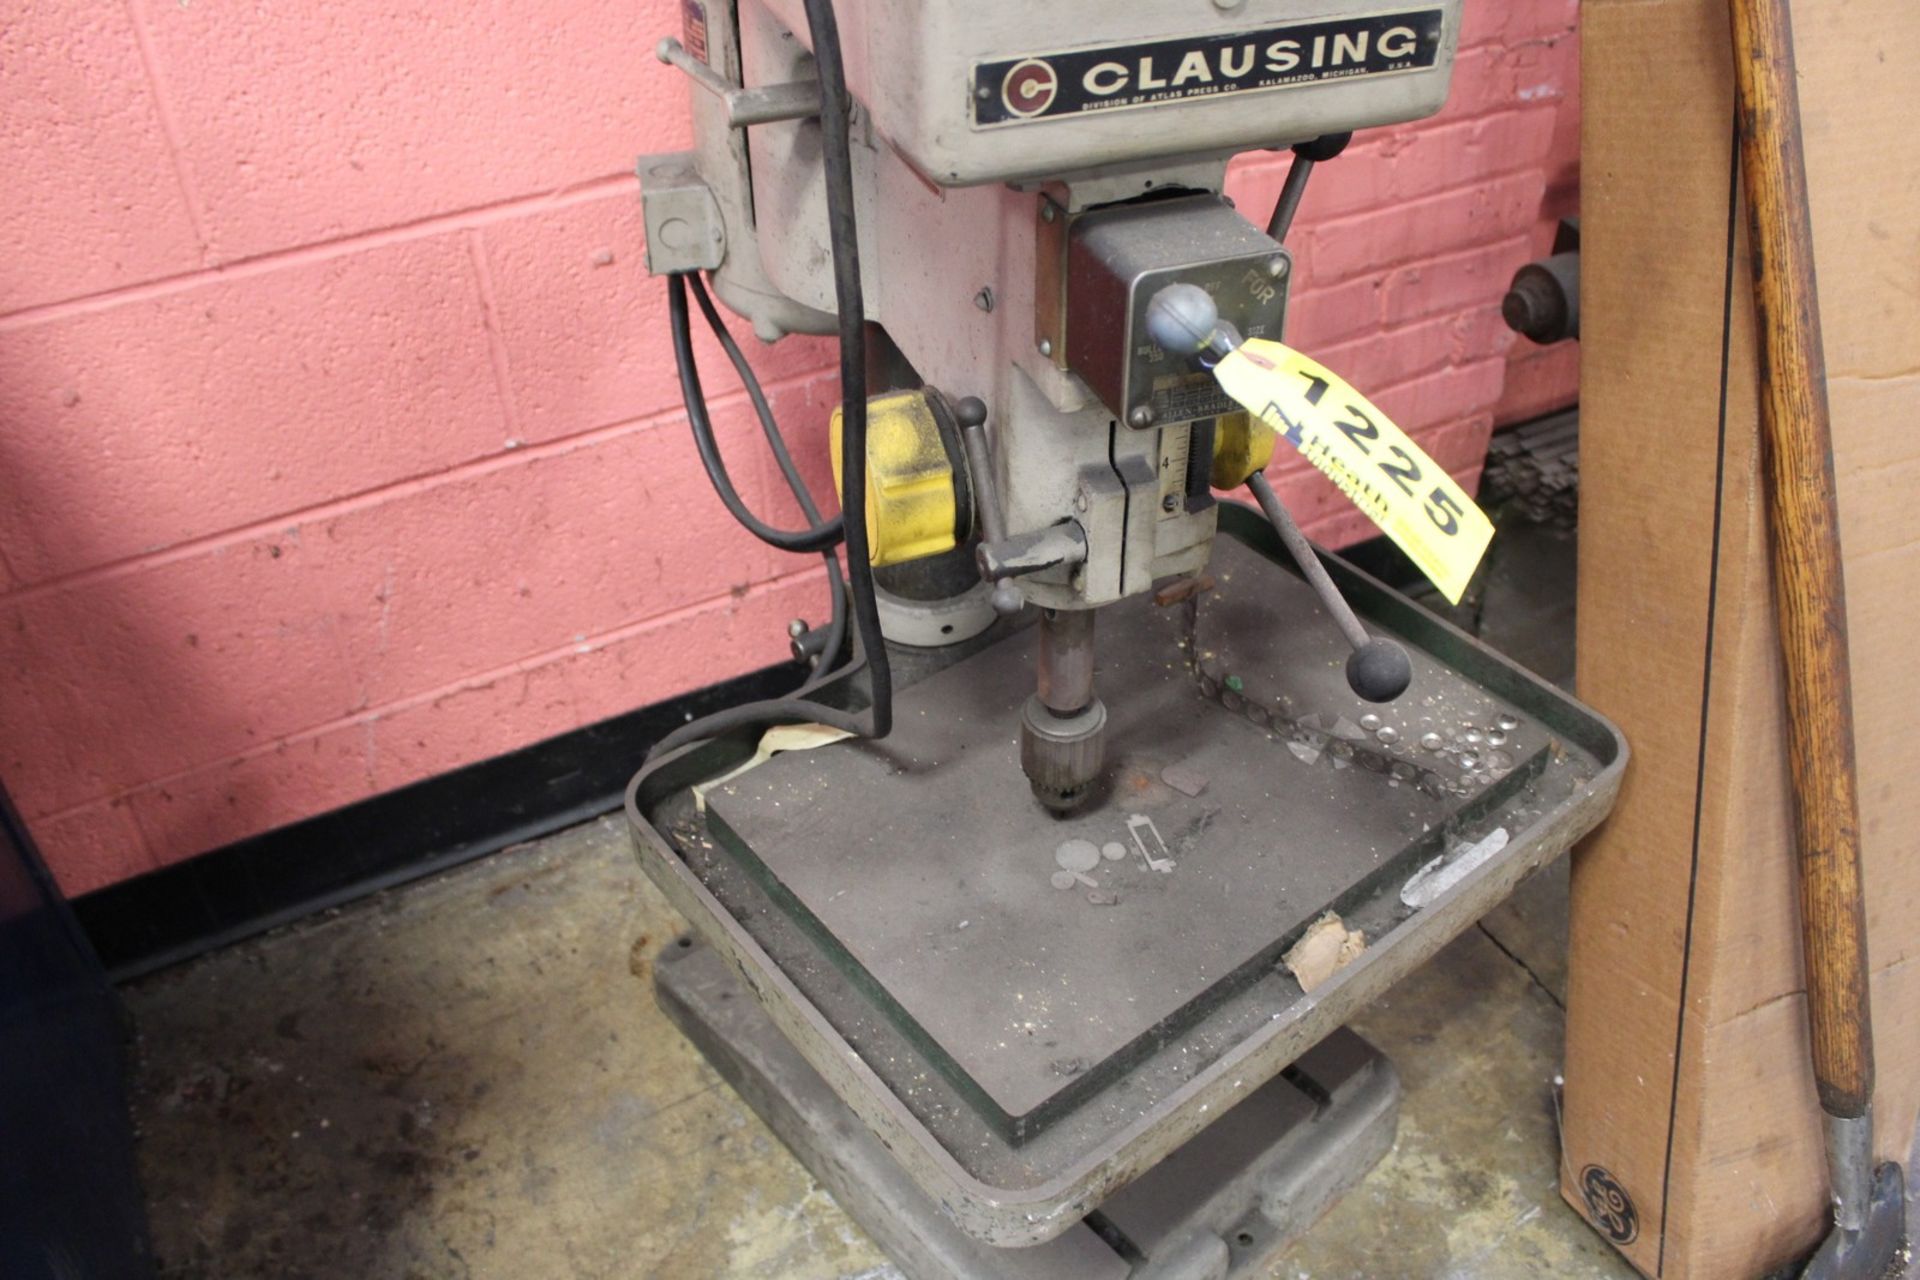 CLAUSING SERIES 16ST 15" VARIABLE SPEED FLOOR STANDING DRILL PRESS S/N 103527 - Image 2 of 3